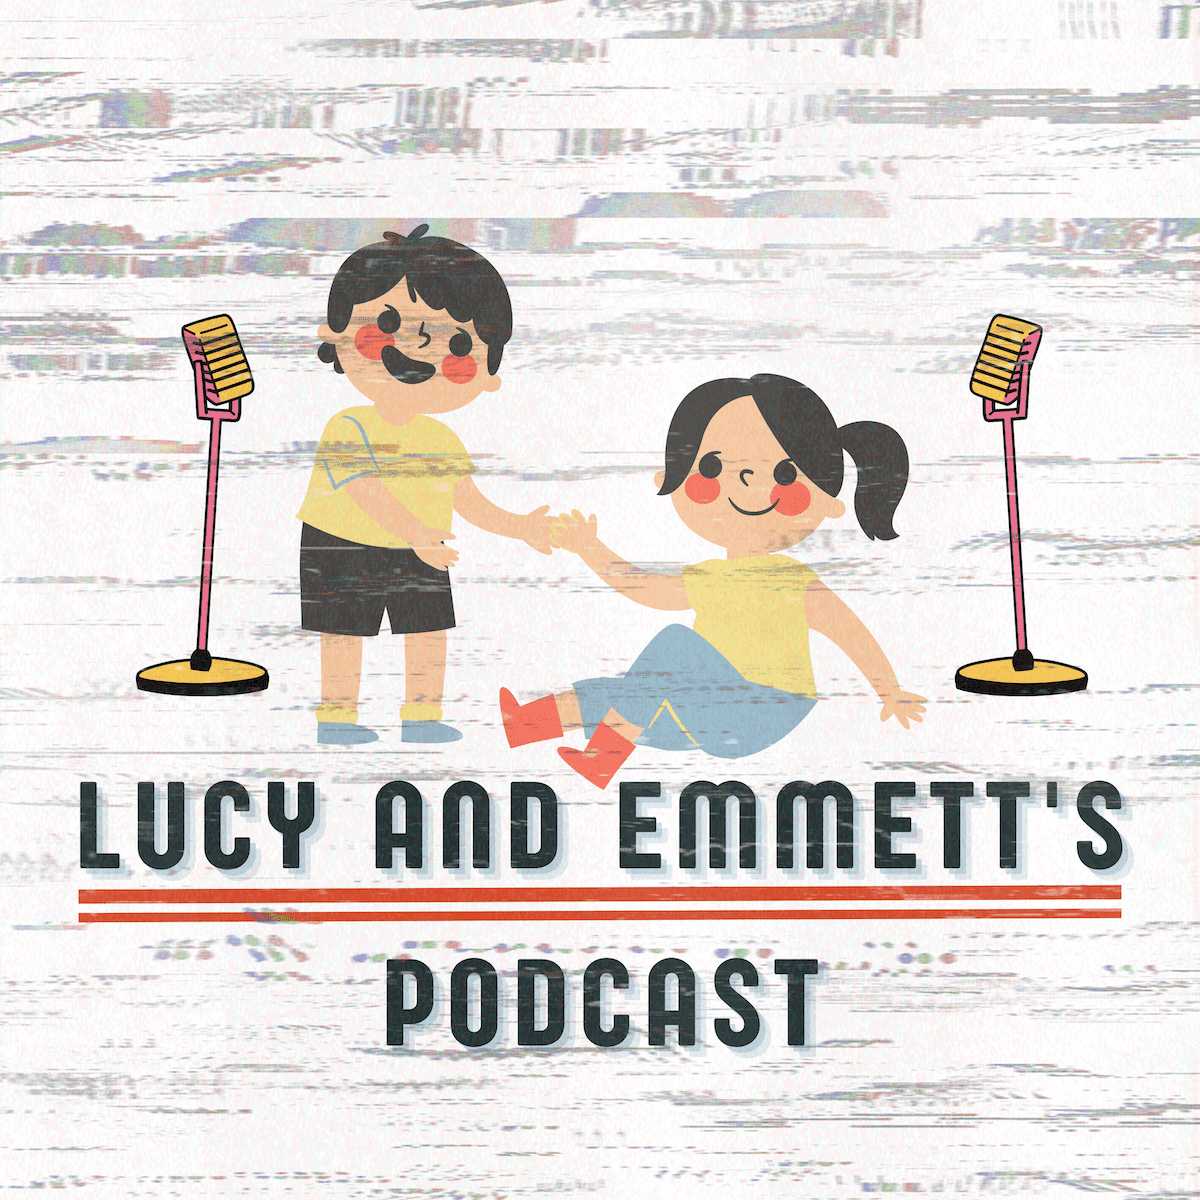 Lucy and Emmett's Podcast Logo